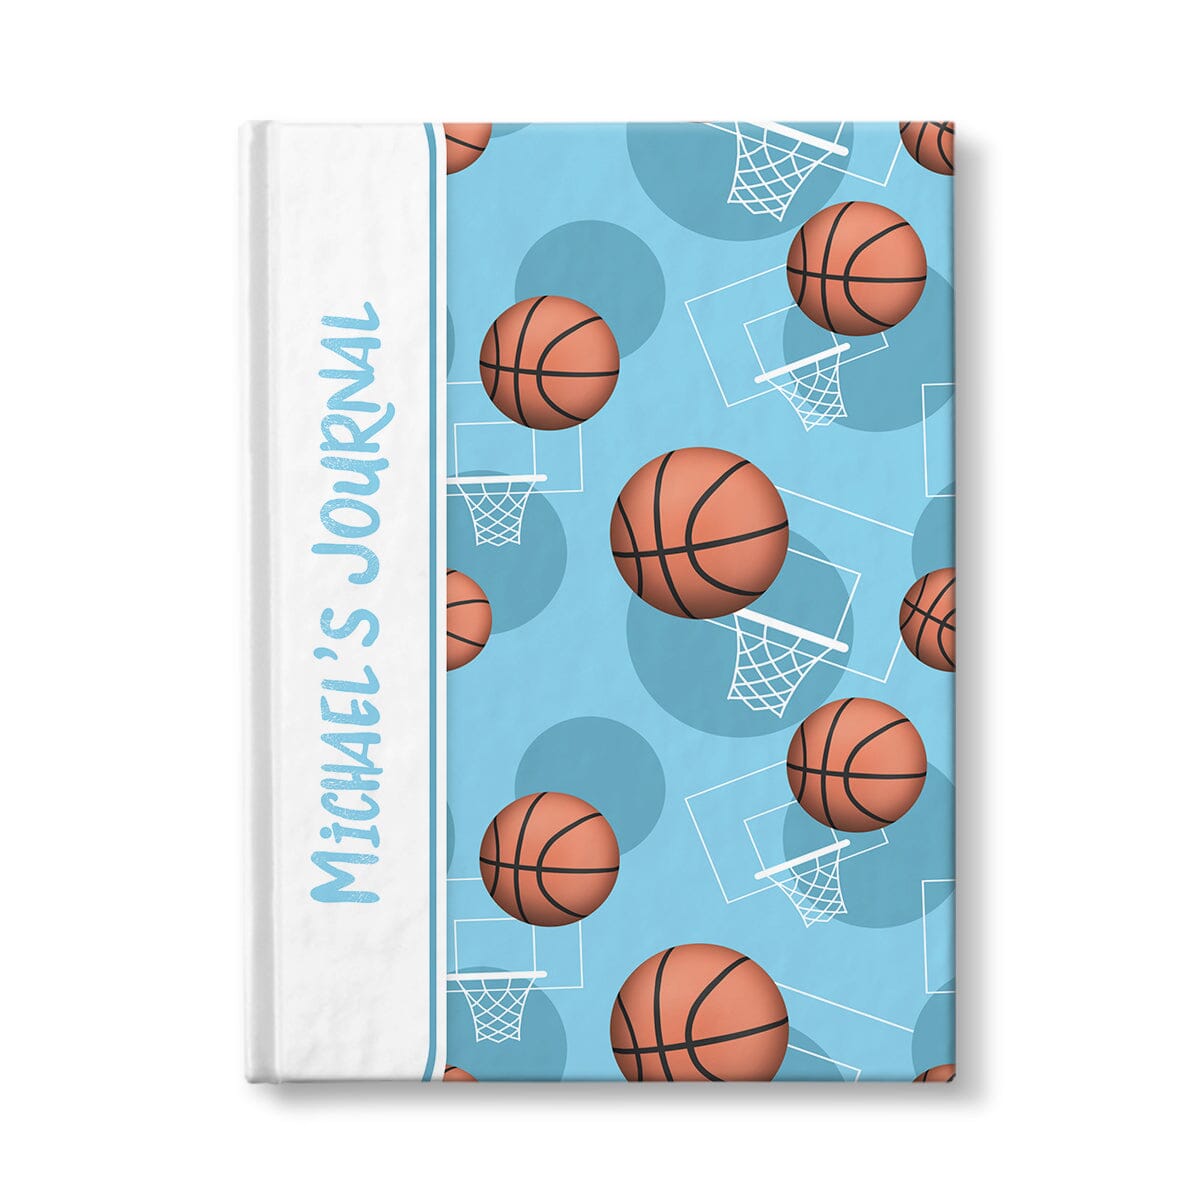 Personalized Light Blue Basketball Journal at Artistically Invited.